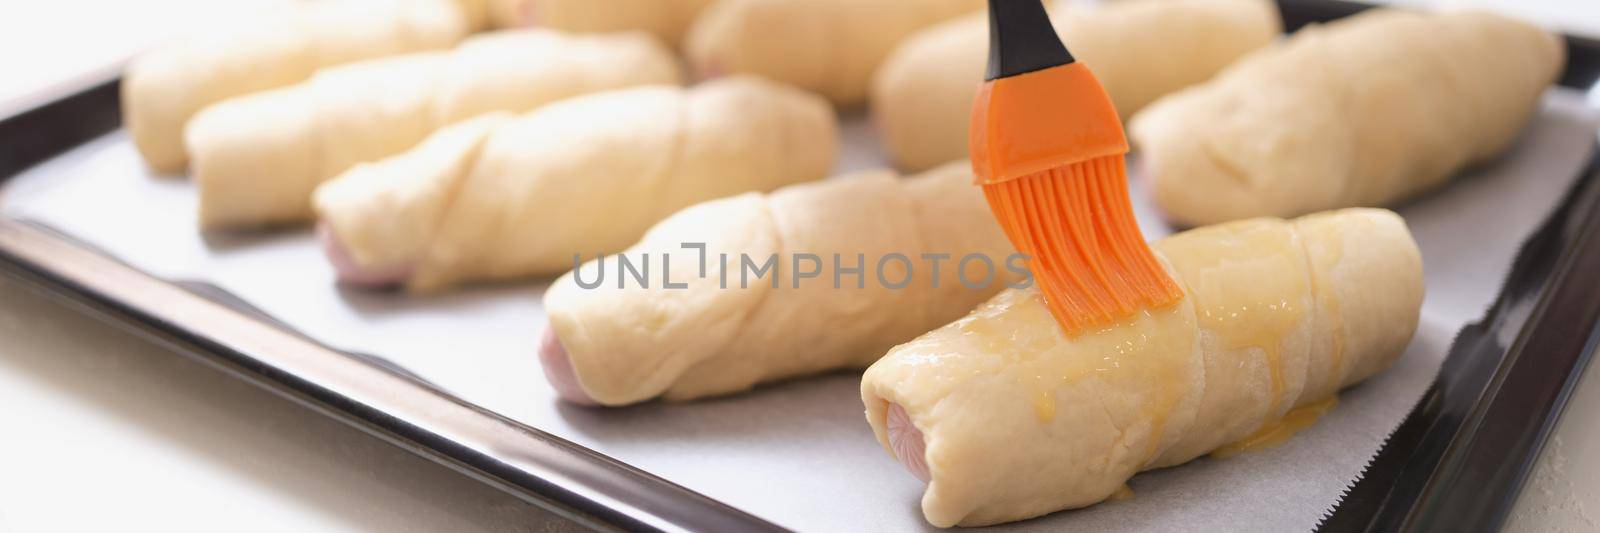 A woman before baking with a brush lubricates dough products by kuprevich